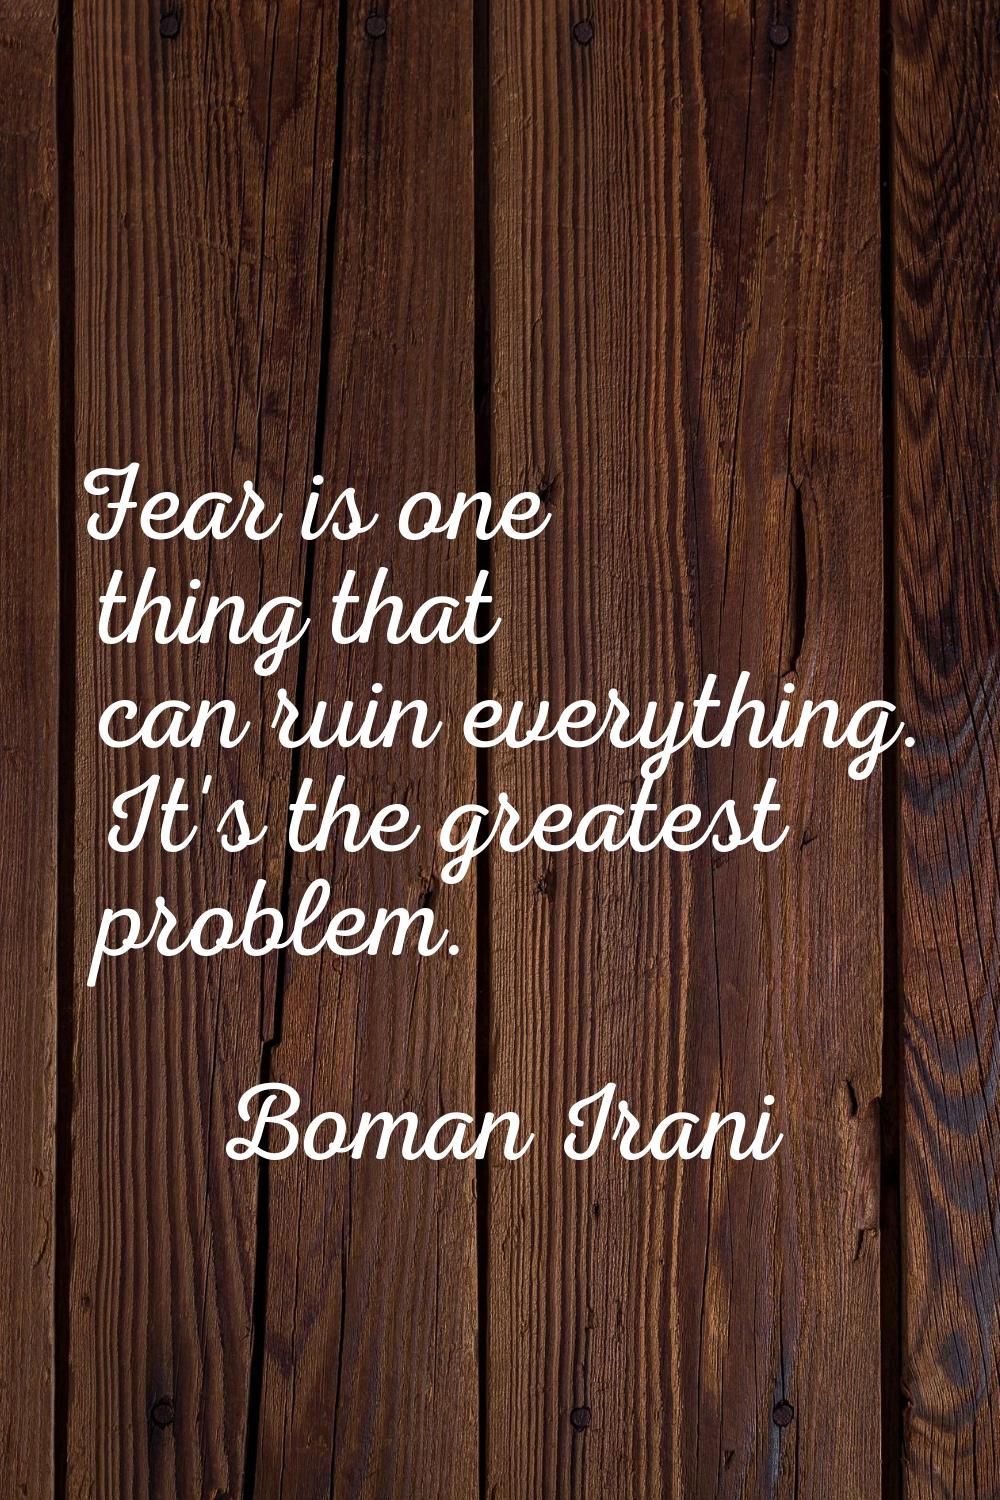 Fear is one thing that can ruin everything. It's the greatest problem.